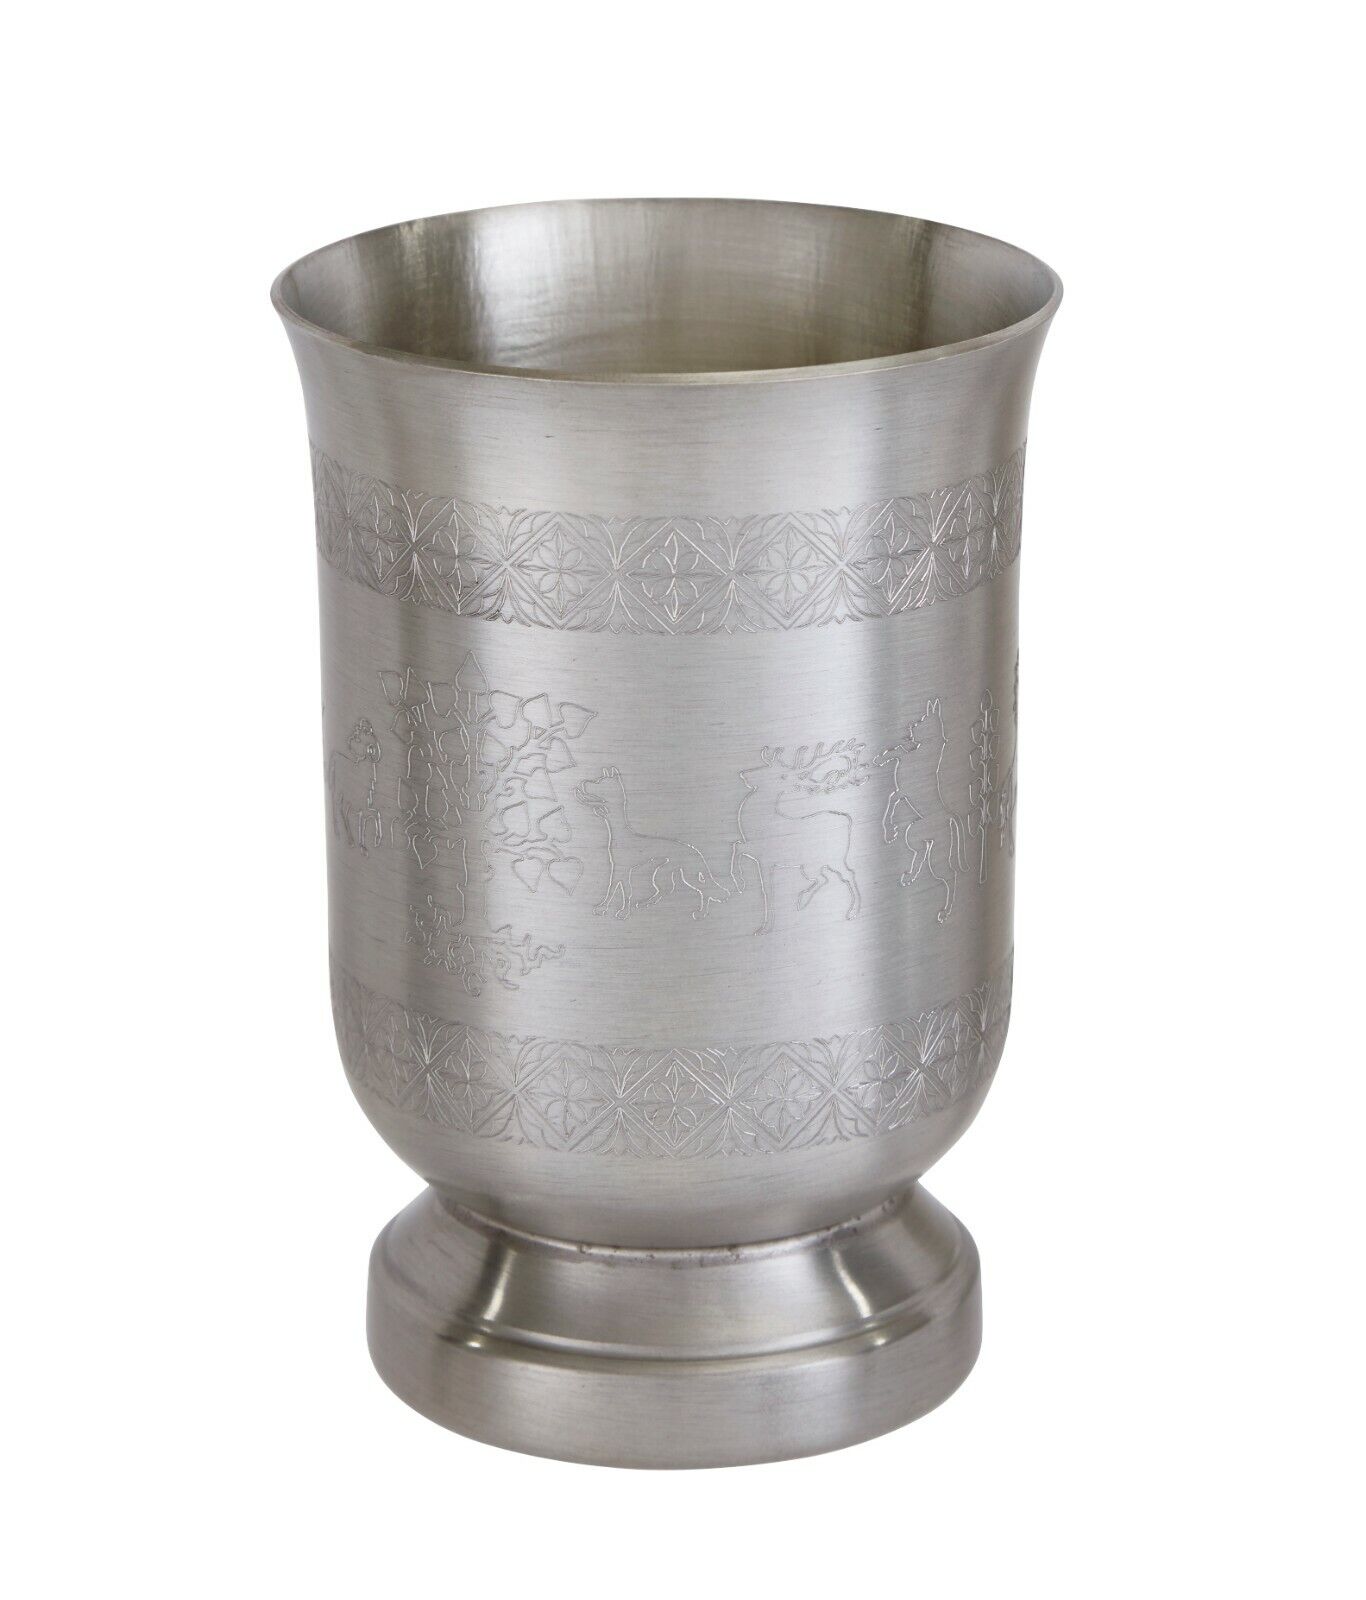 Wentworth Pewter - Medieval Hunting Scene Drinking Cup